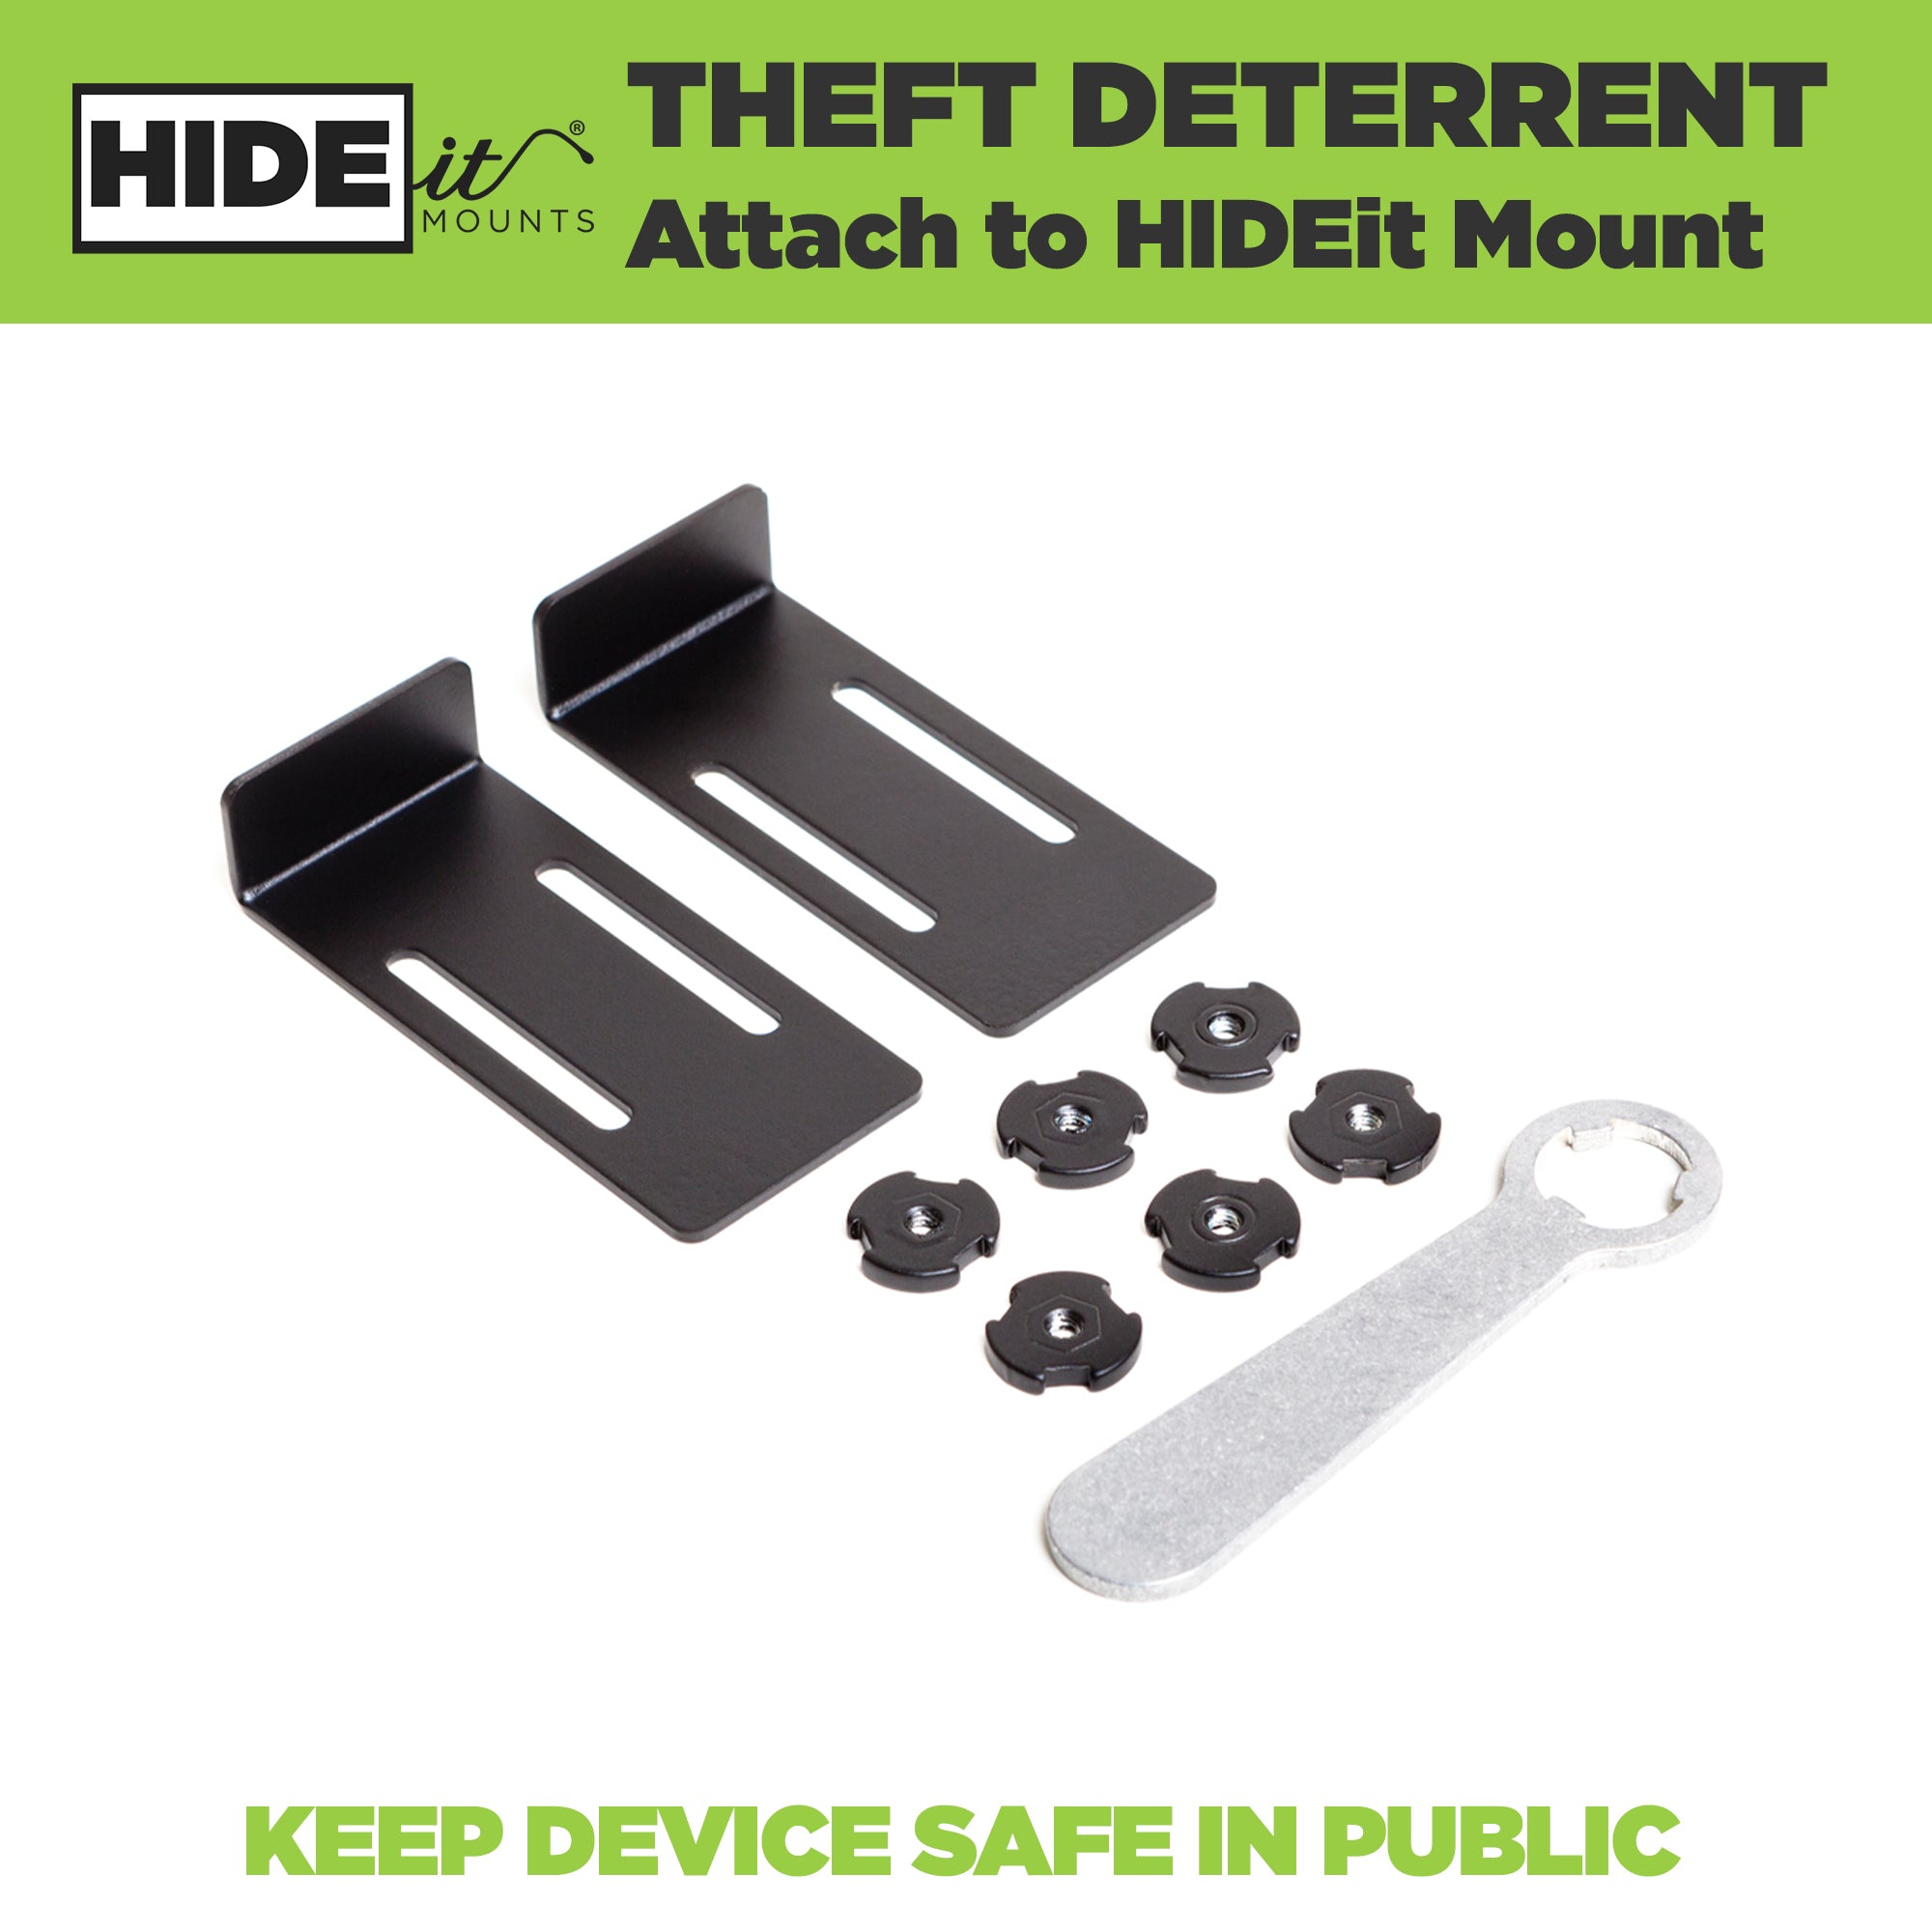 The HIDEit Theft Deterrent Kit attaches to other HIDEit Mounts to lock devices in place. 